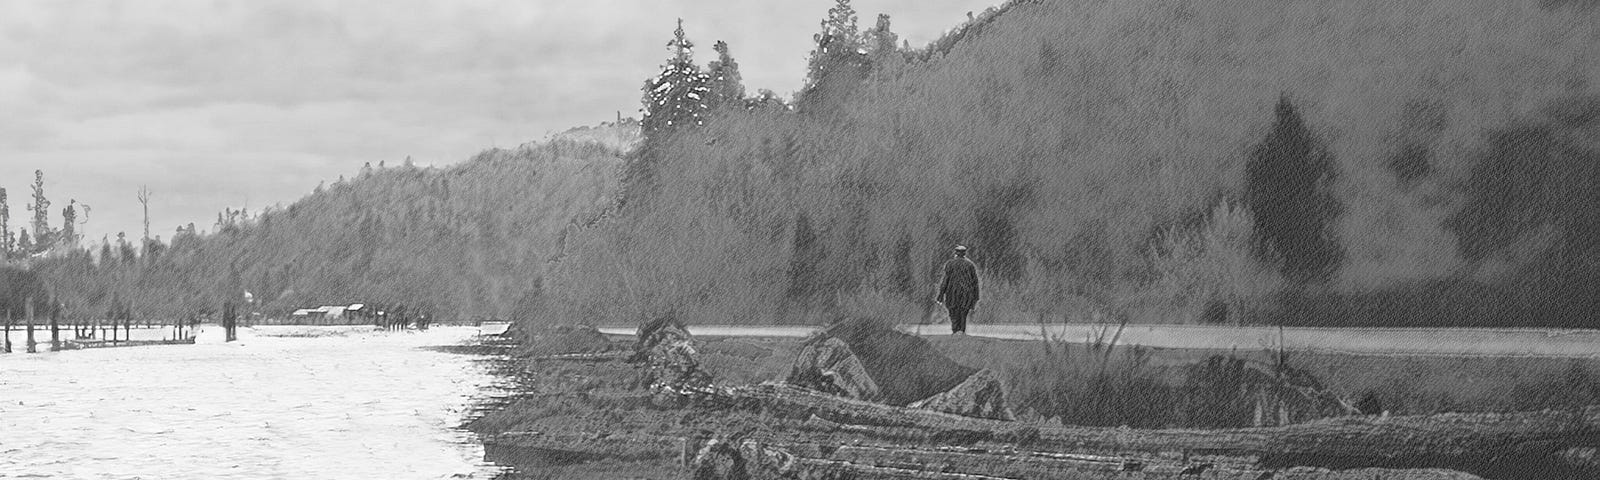 An old man walking down a road next to a tidal river, with old logs scattered on the shoreline.